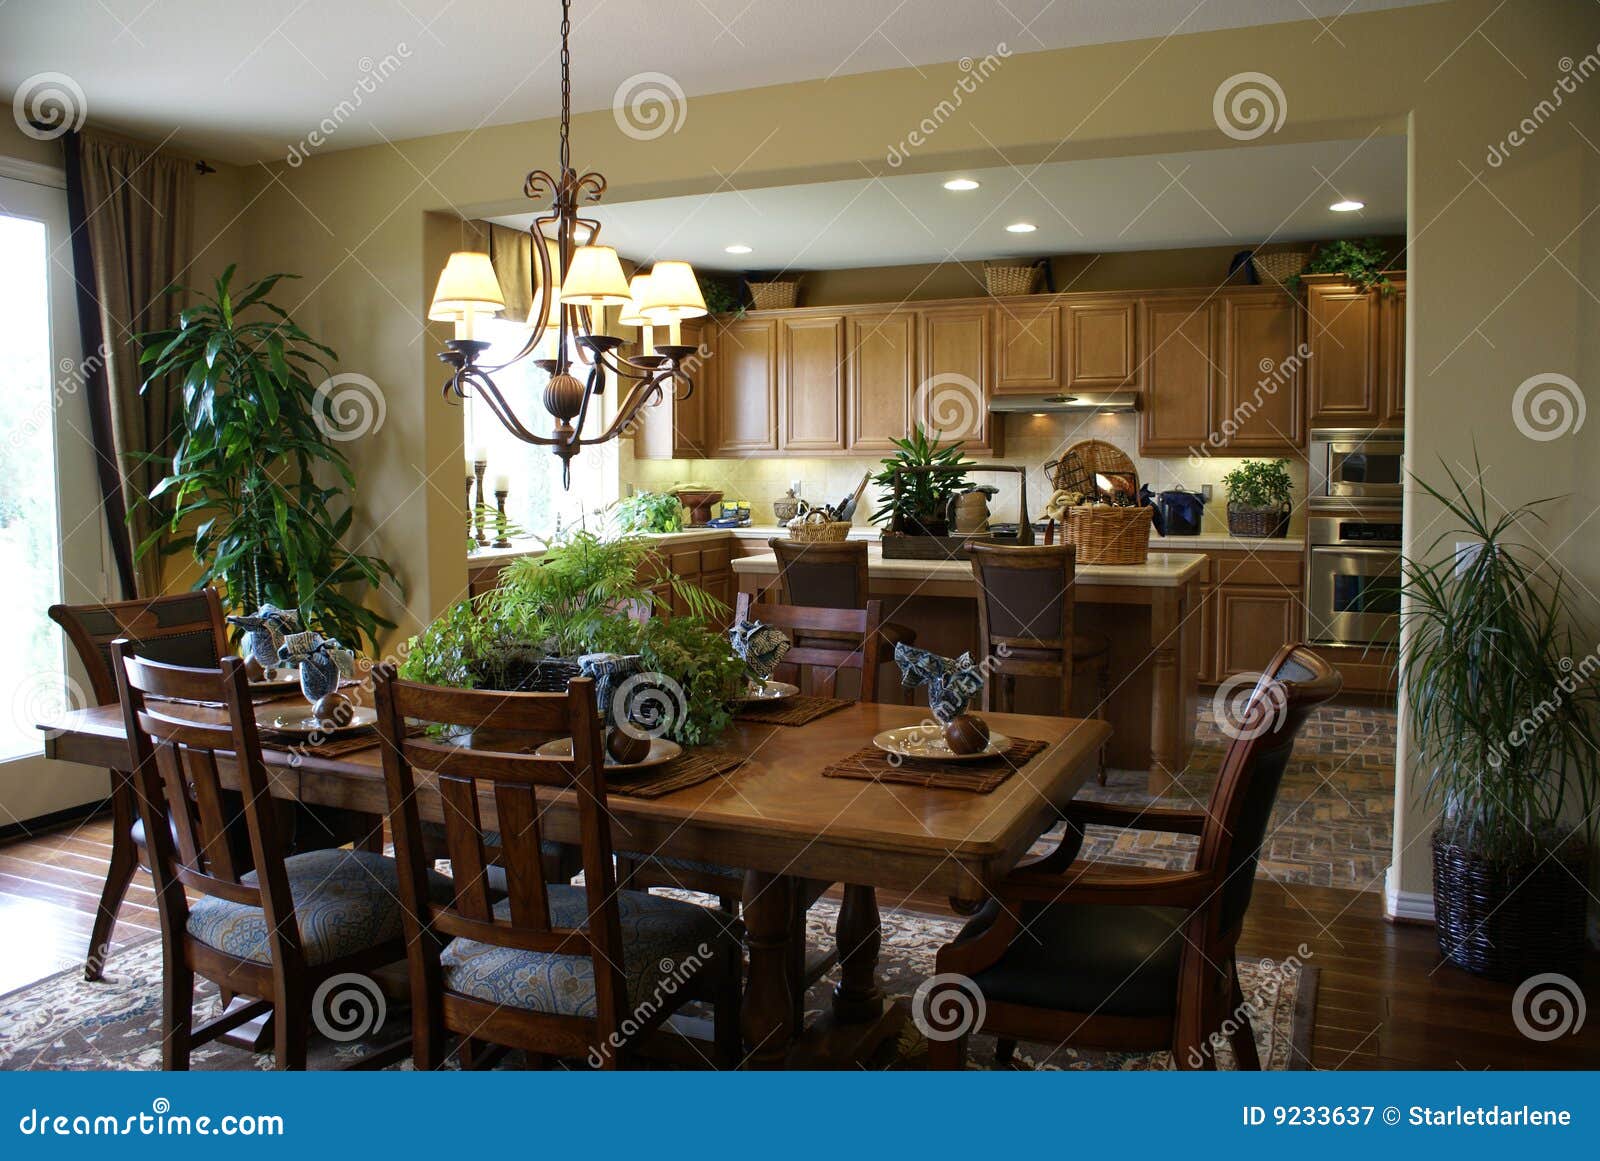 Beautiful Kitchen And Dining Room Royalty Free Stock Photography 